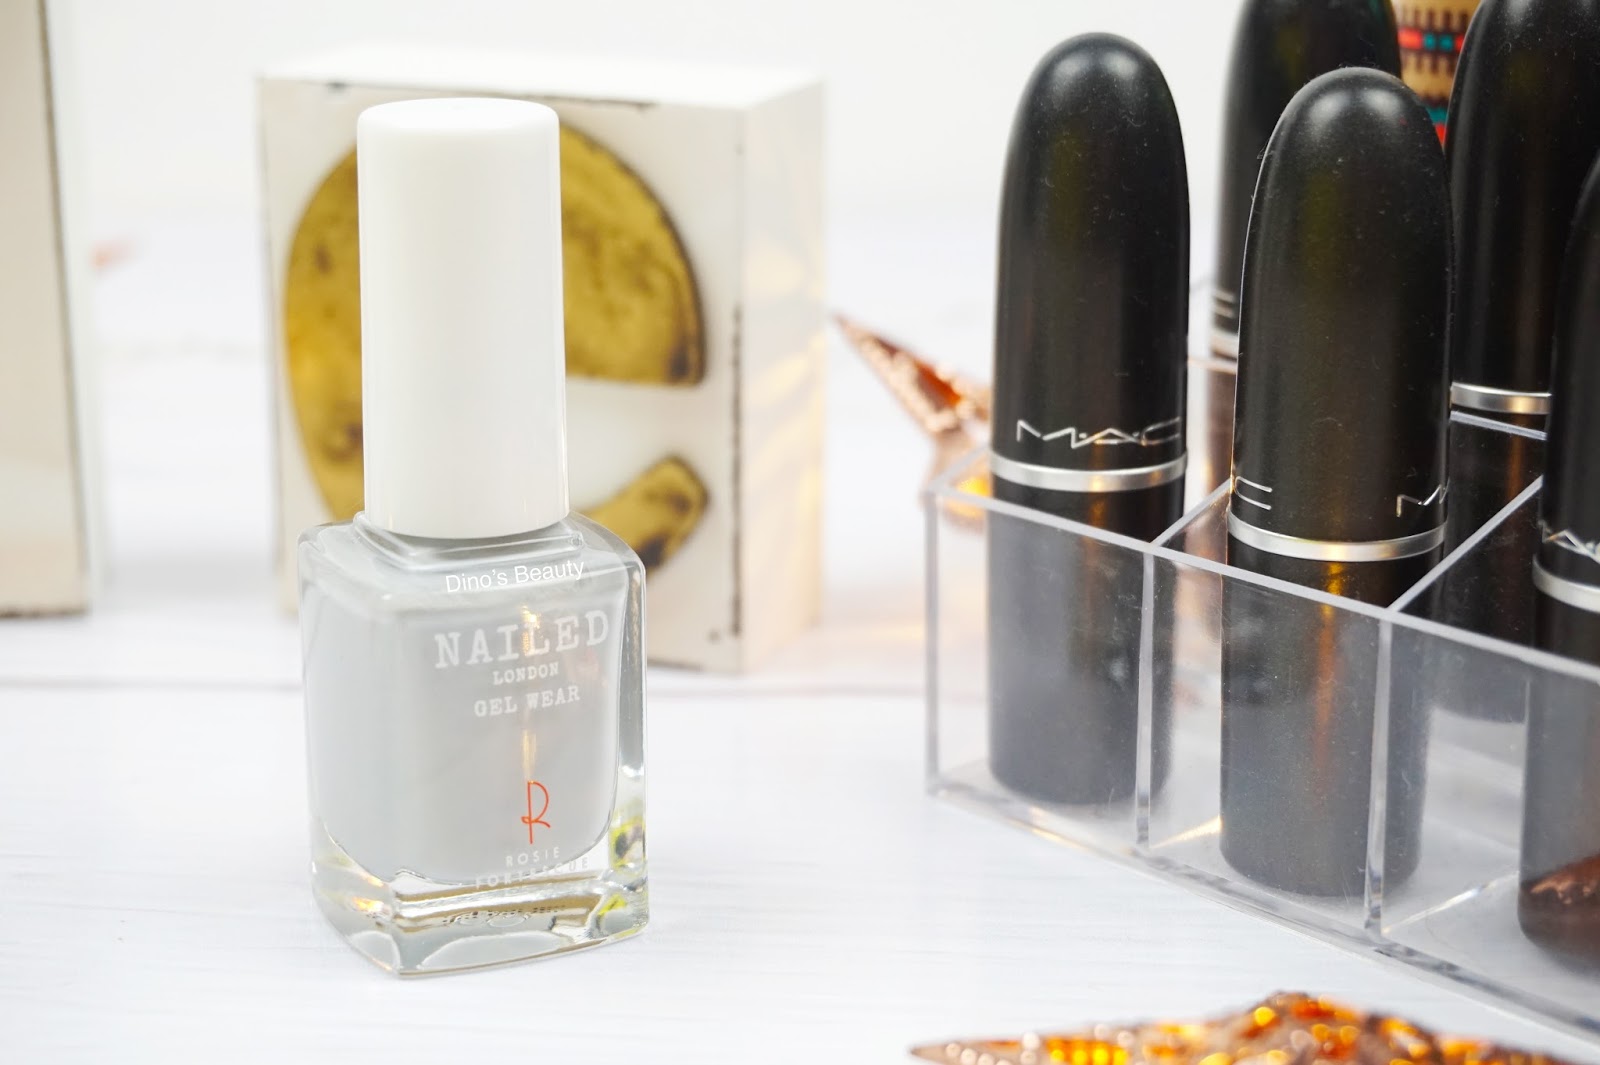 bbloggers, beauty, beauty bloggers, beauty review, NAILED, NAILED London, Manicure, Manicure Mondays, Gel Nails, Gel Look, Nails, Nail Polish, Rosie Fortescue, Made In Chelsea, Swatches, Noodle Nude, Dirty Blonde, Fifty Shades, Eye Candy, Thigh High Club